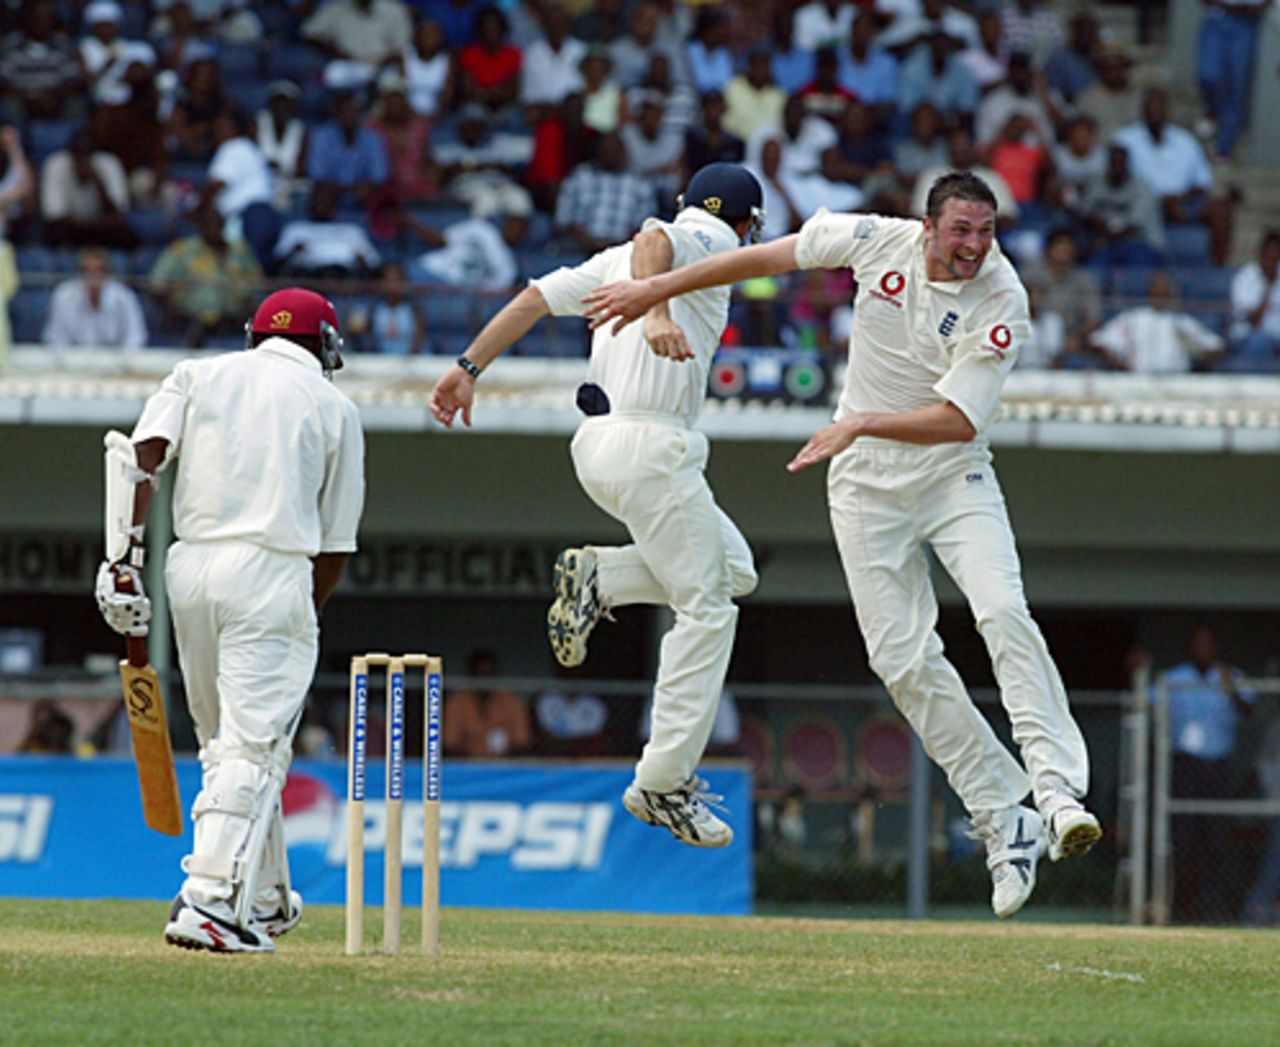 Steve Harmison celebrates his fifth wicket of the innings, of Tino Best, West Indies vs England, first Test, day four, Kingston, March 14, 2004